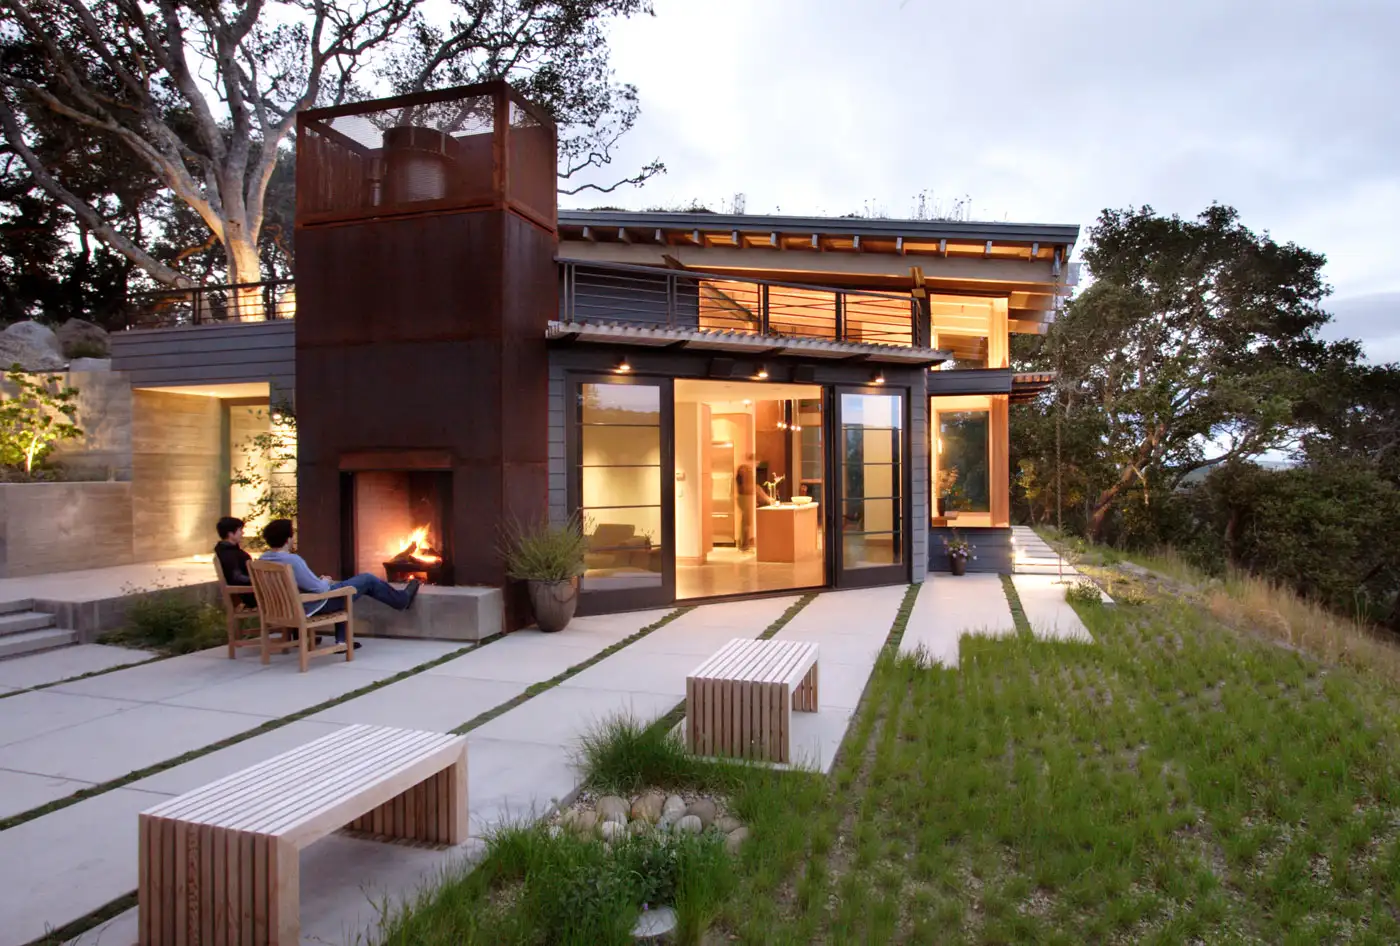 Sustainable Houses